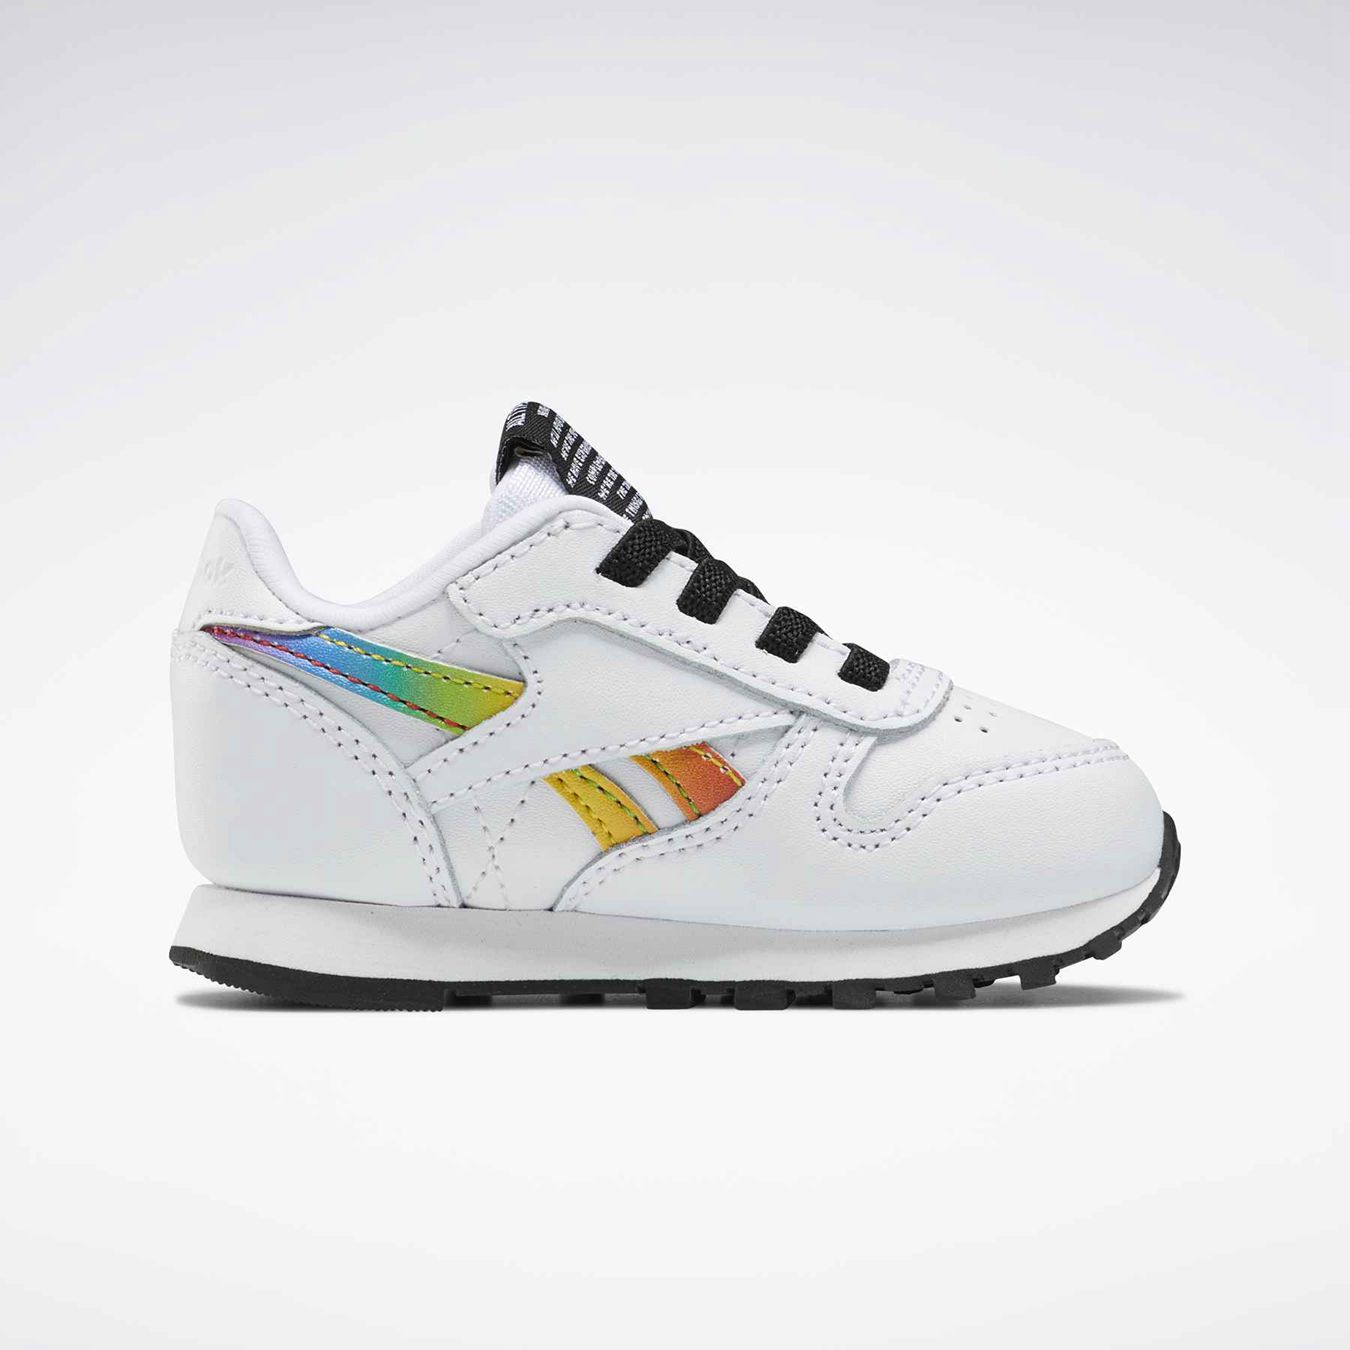 Reebok Classic Leather Pride Shoes - Toddler